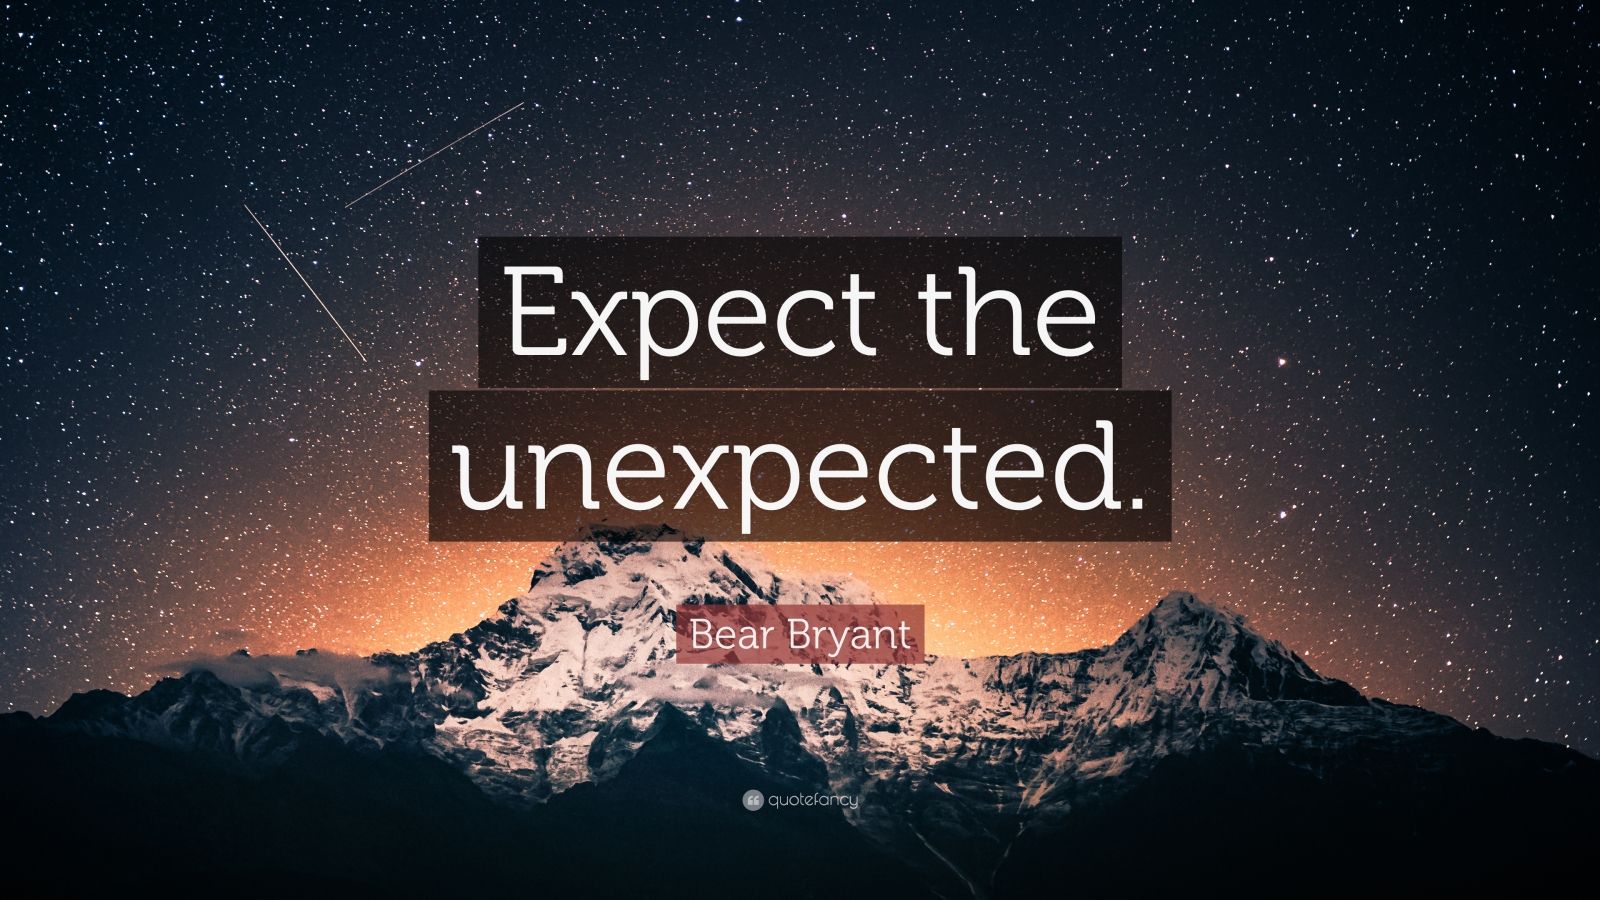 Bear Bryant Quote: “Expect the unexpected.” (12 wallpapers) - Quotefancy